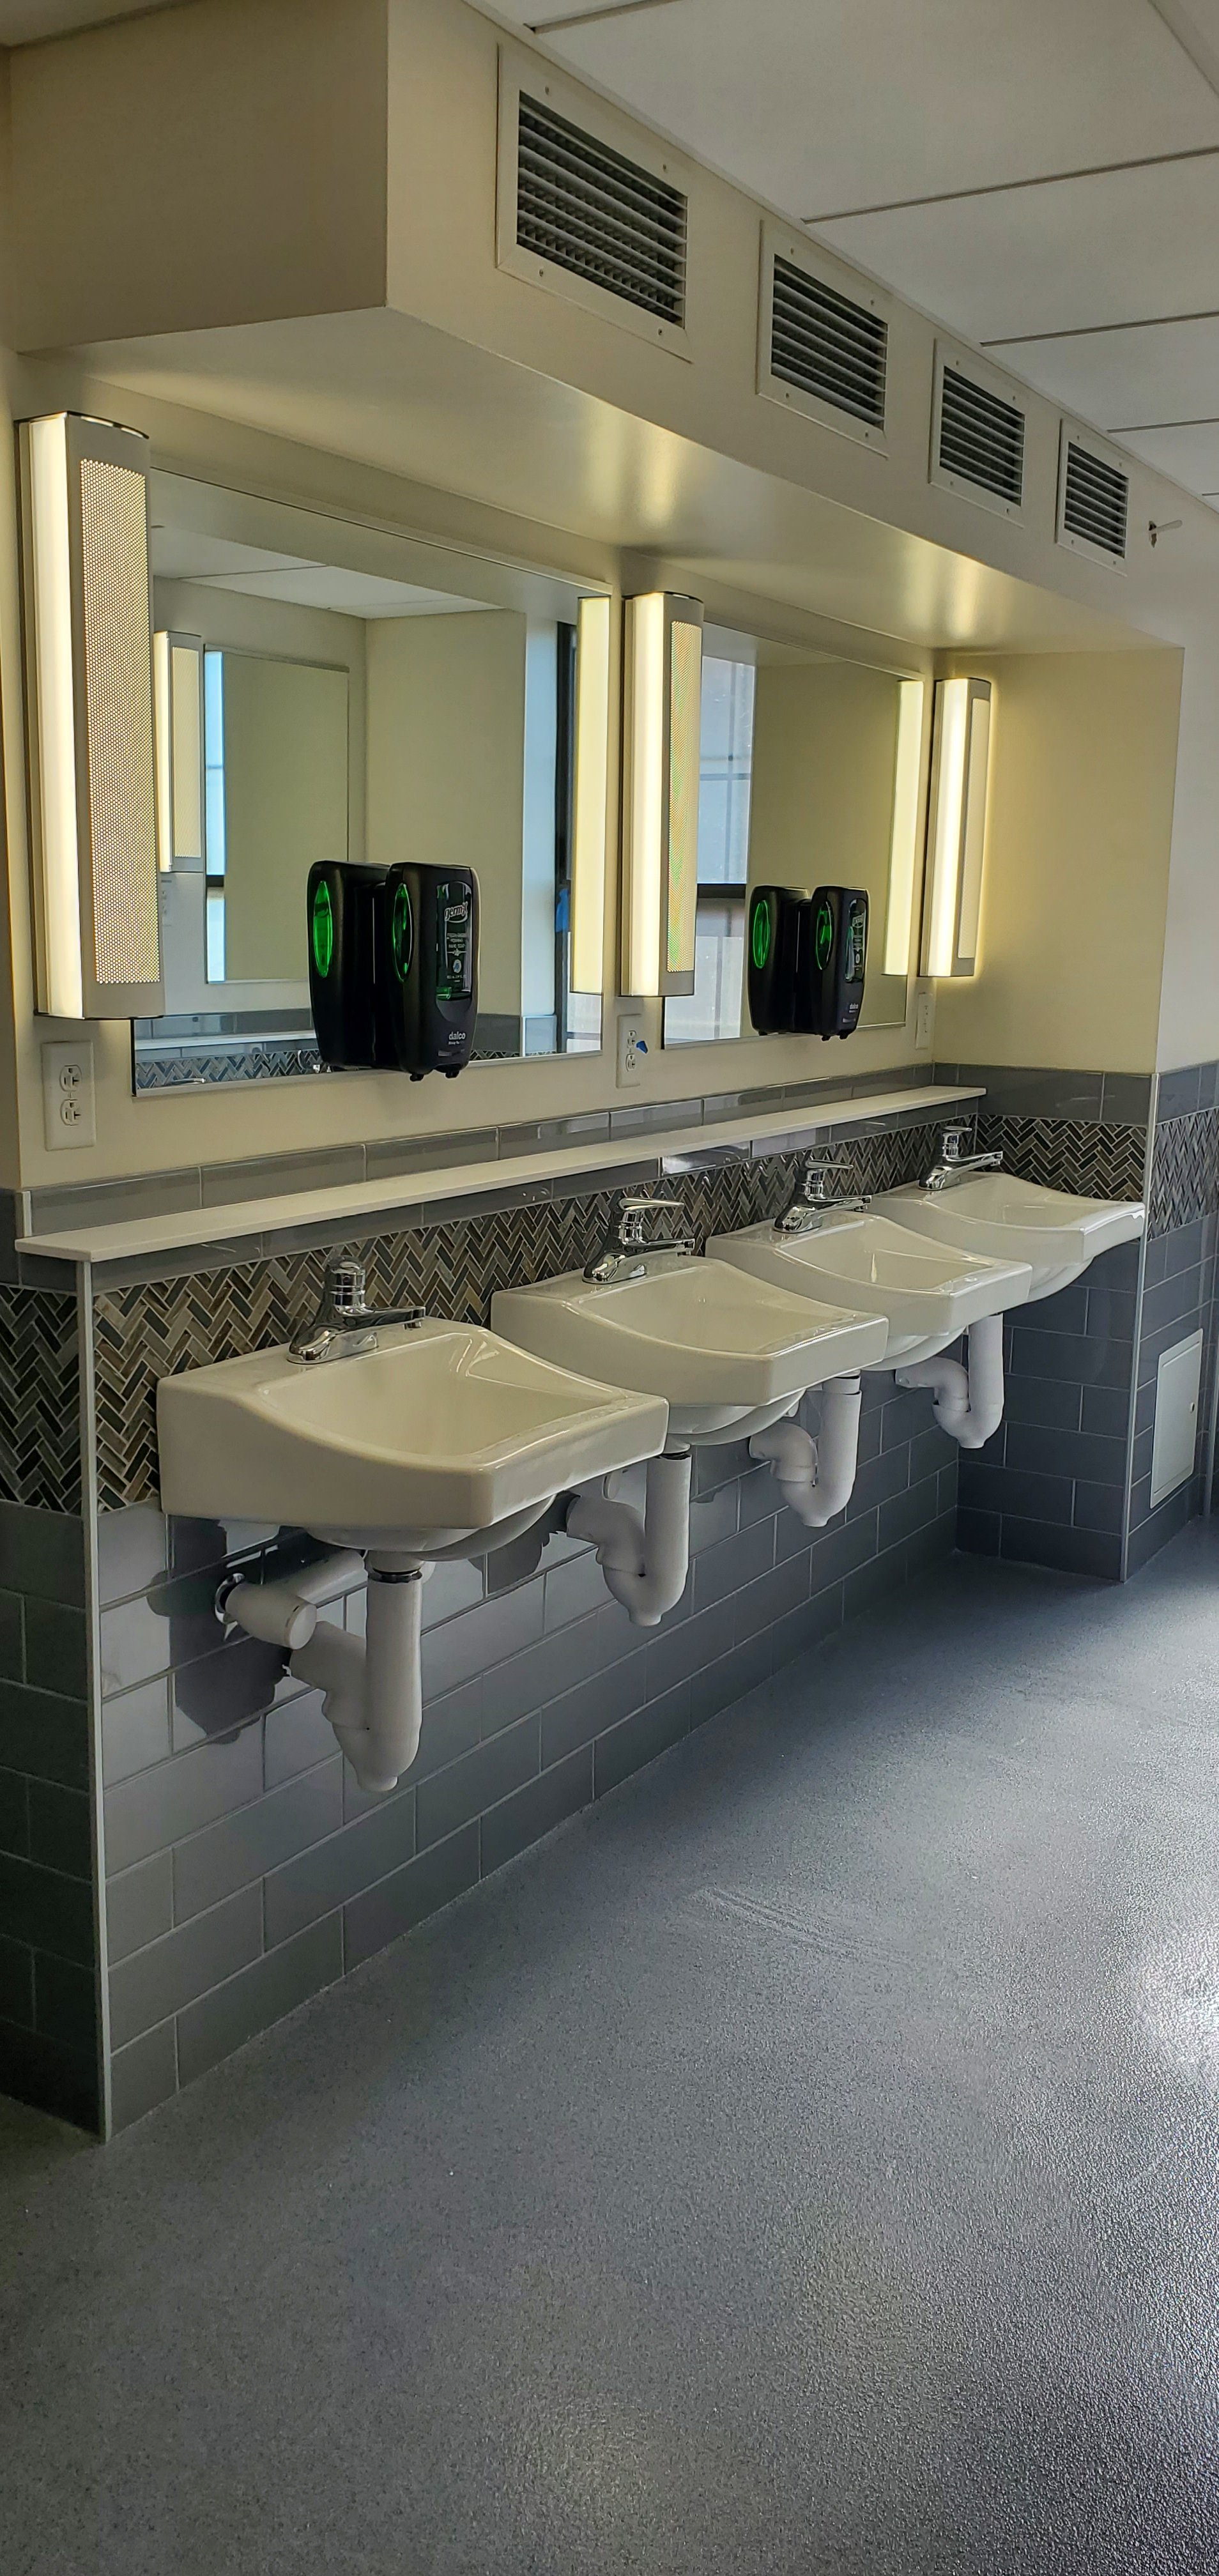 DHH Restroom Remodel Nearly Complete Sinks